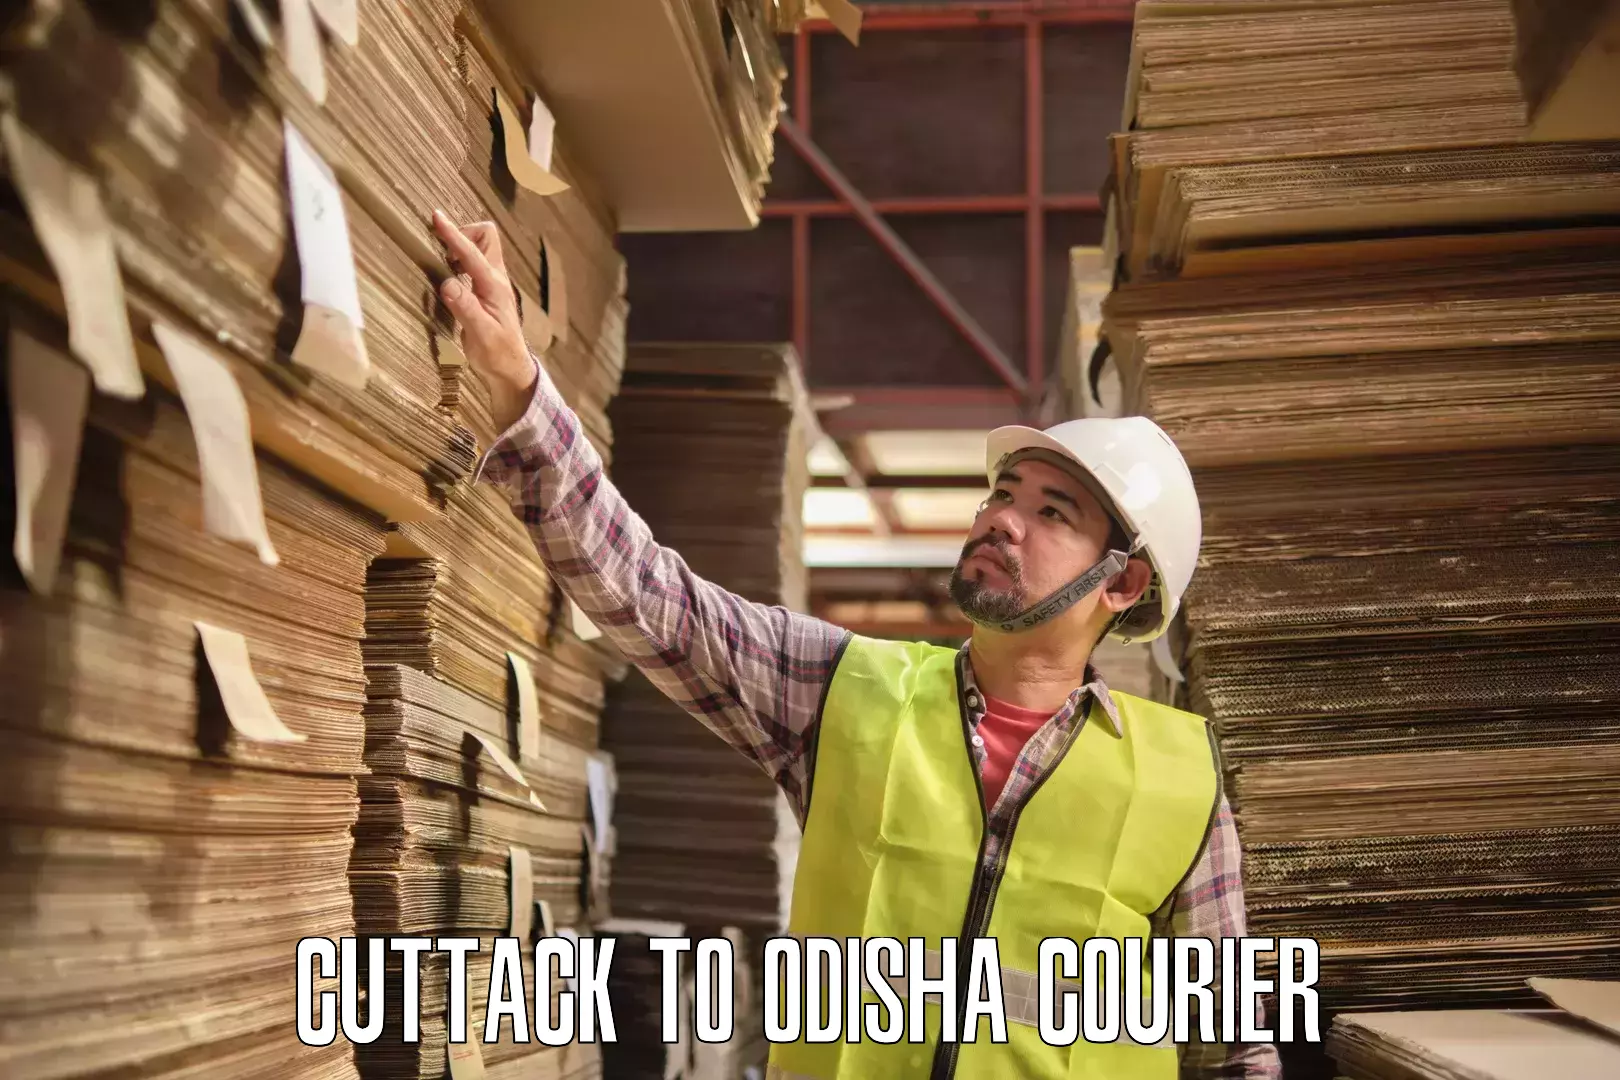 International courier networks Cuttack to Odisha